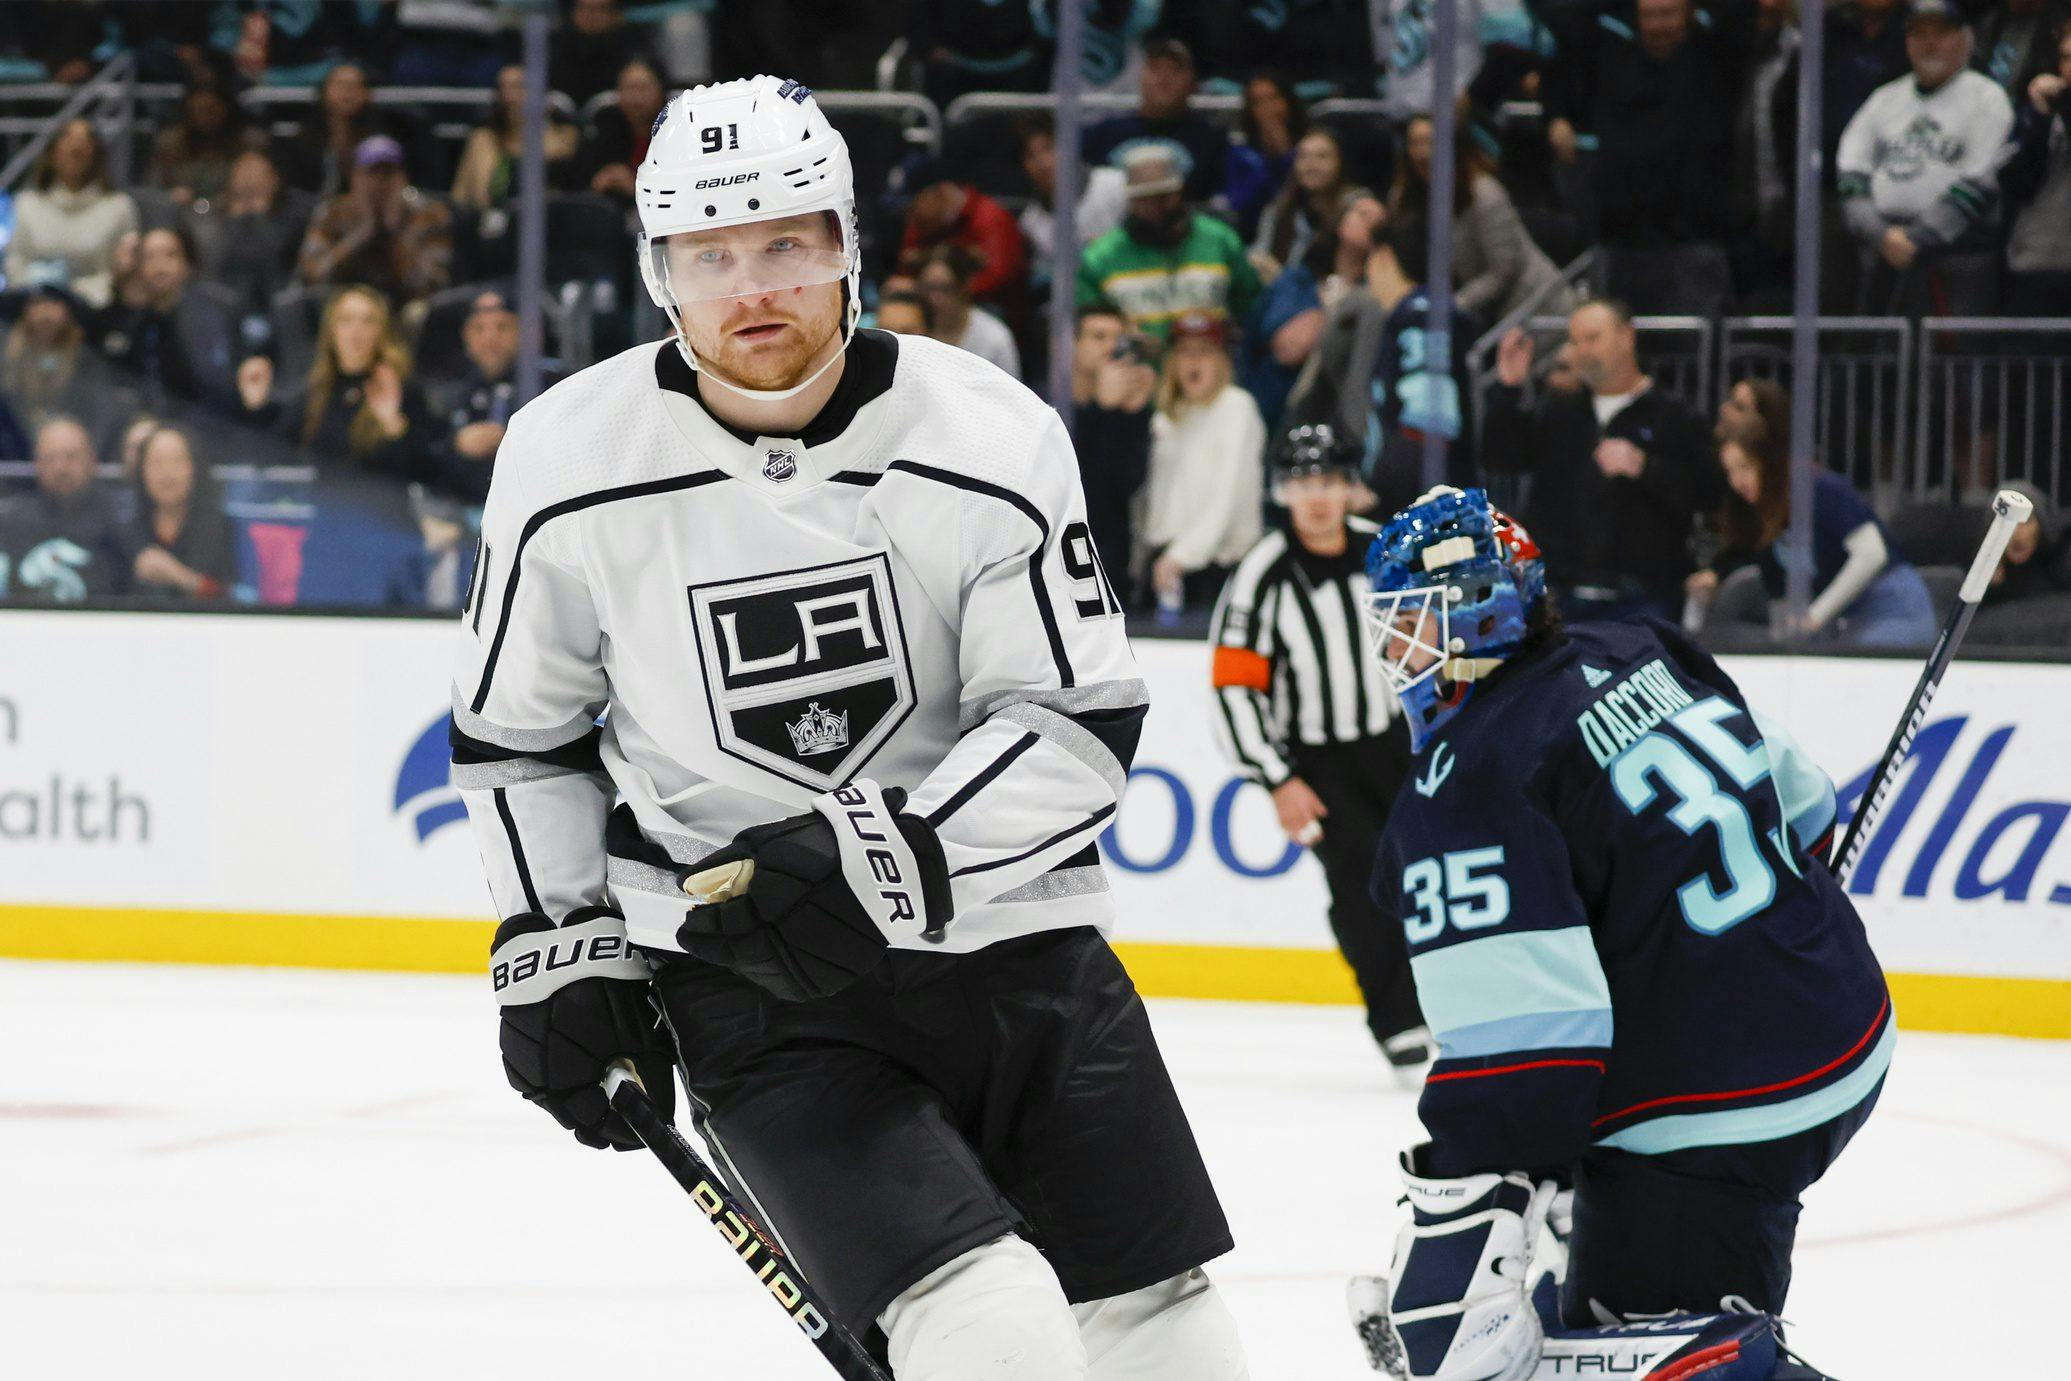 Los Angeles Kings’ Carl Grundstrom will not return to game vs. Sabres due to lower-body injury